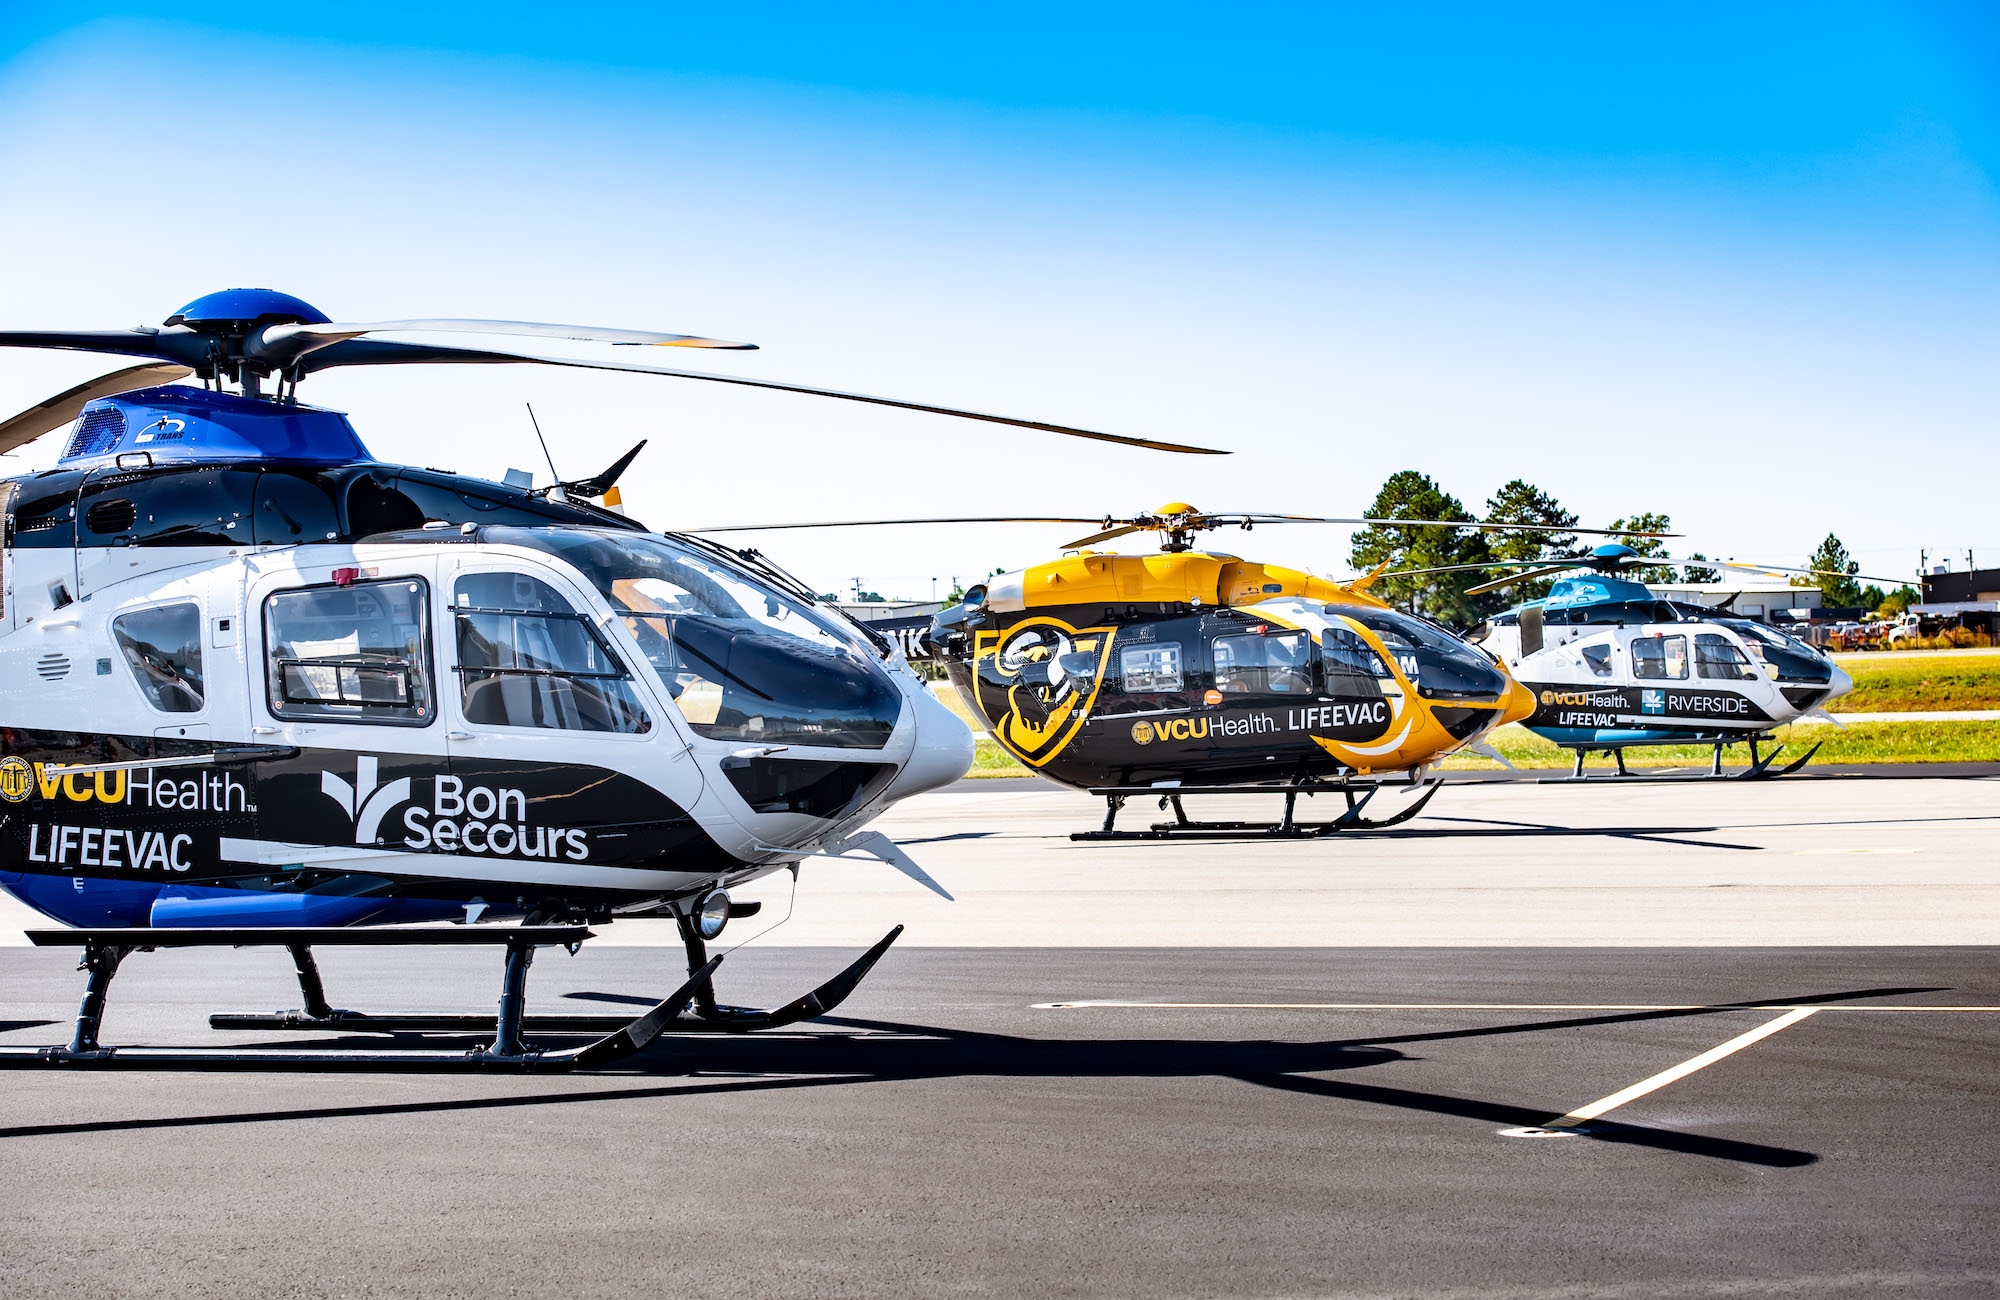 New alliance expands air medical services in Virginia